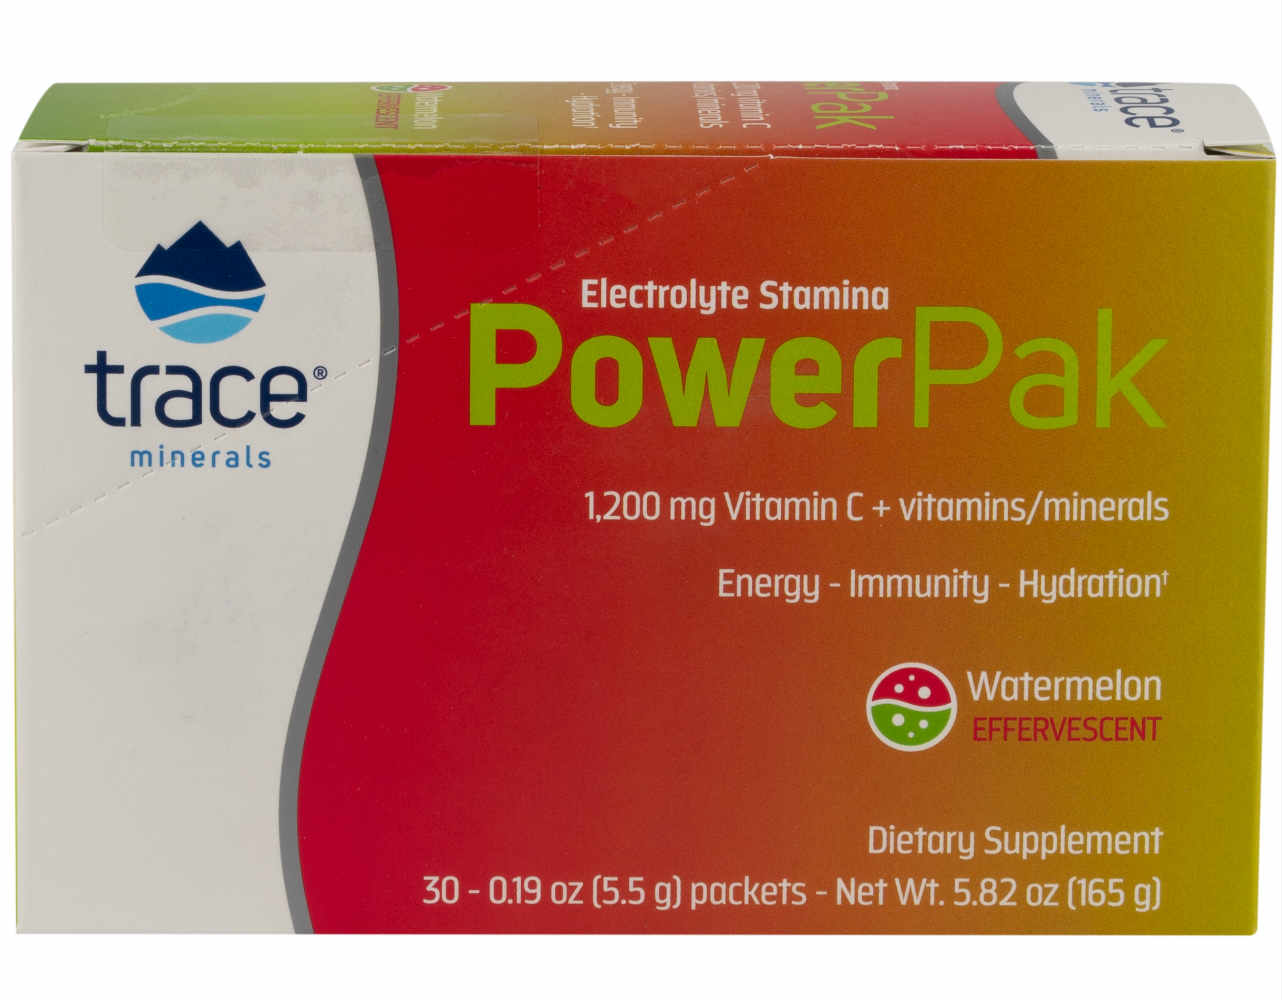 Electrolyte Stamina Power Pak Non-GMO Watermelon 878941004391 from Trace Minerals Research